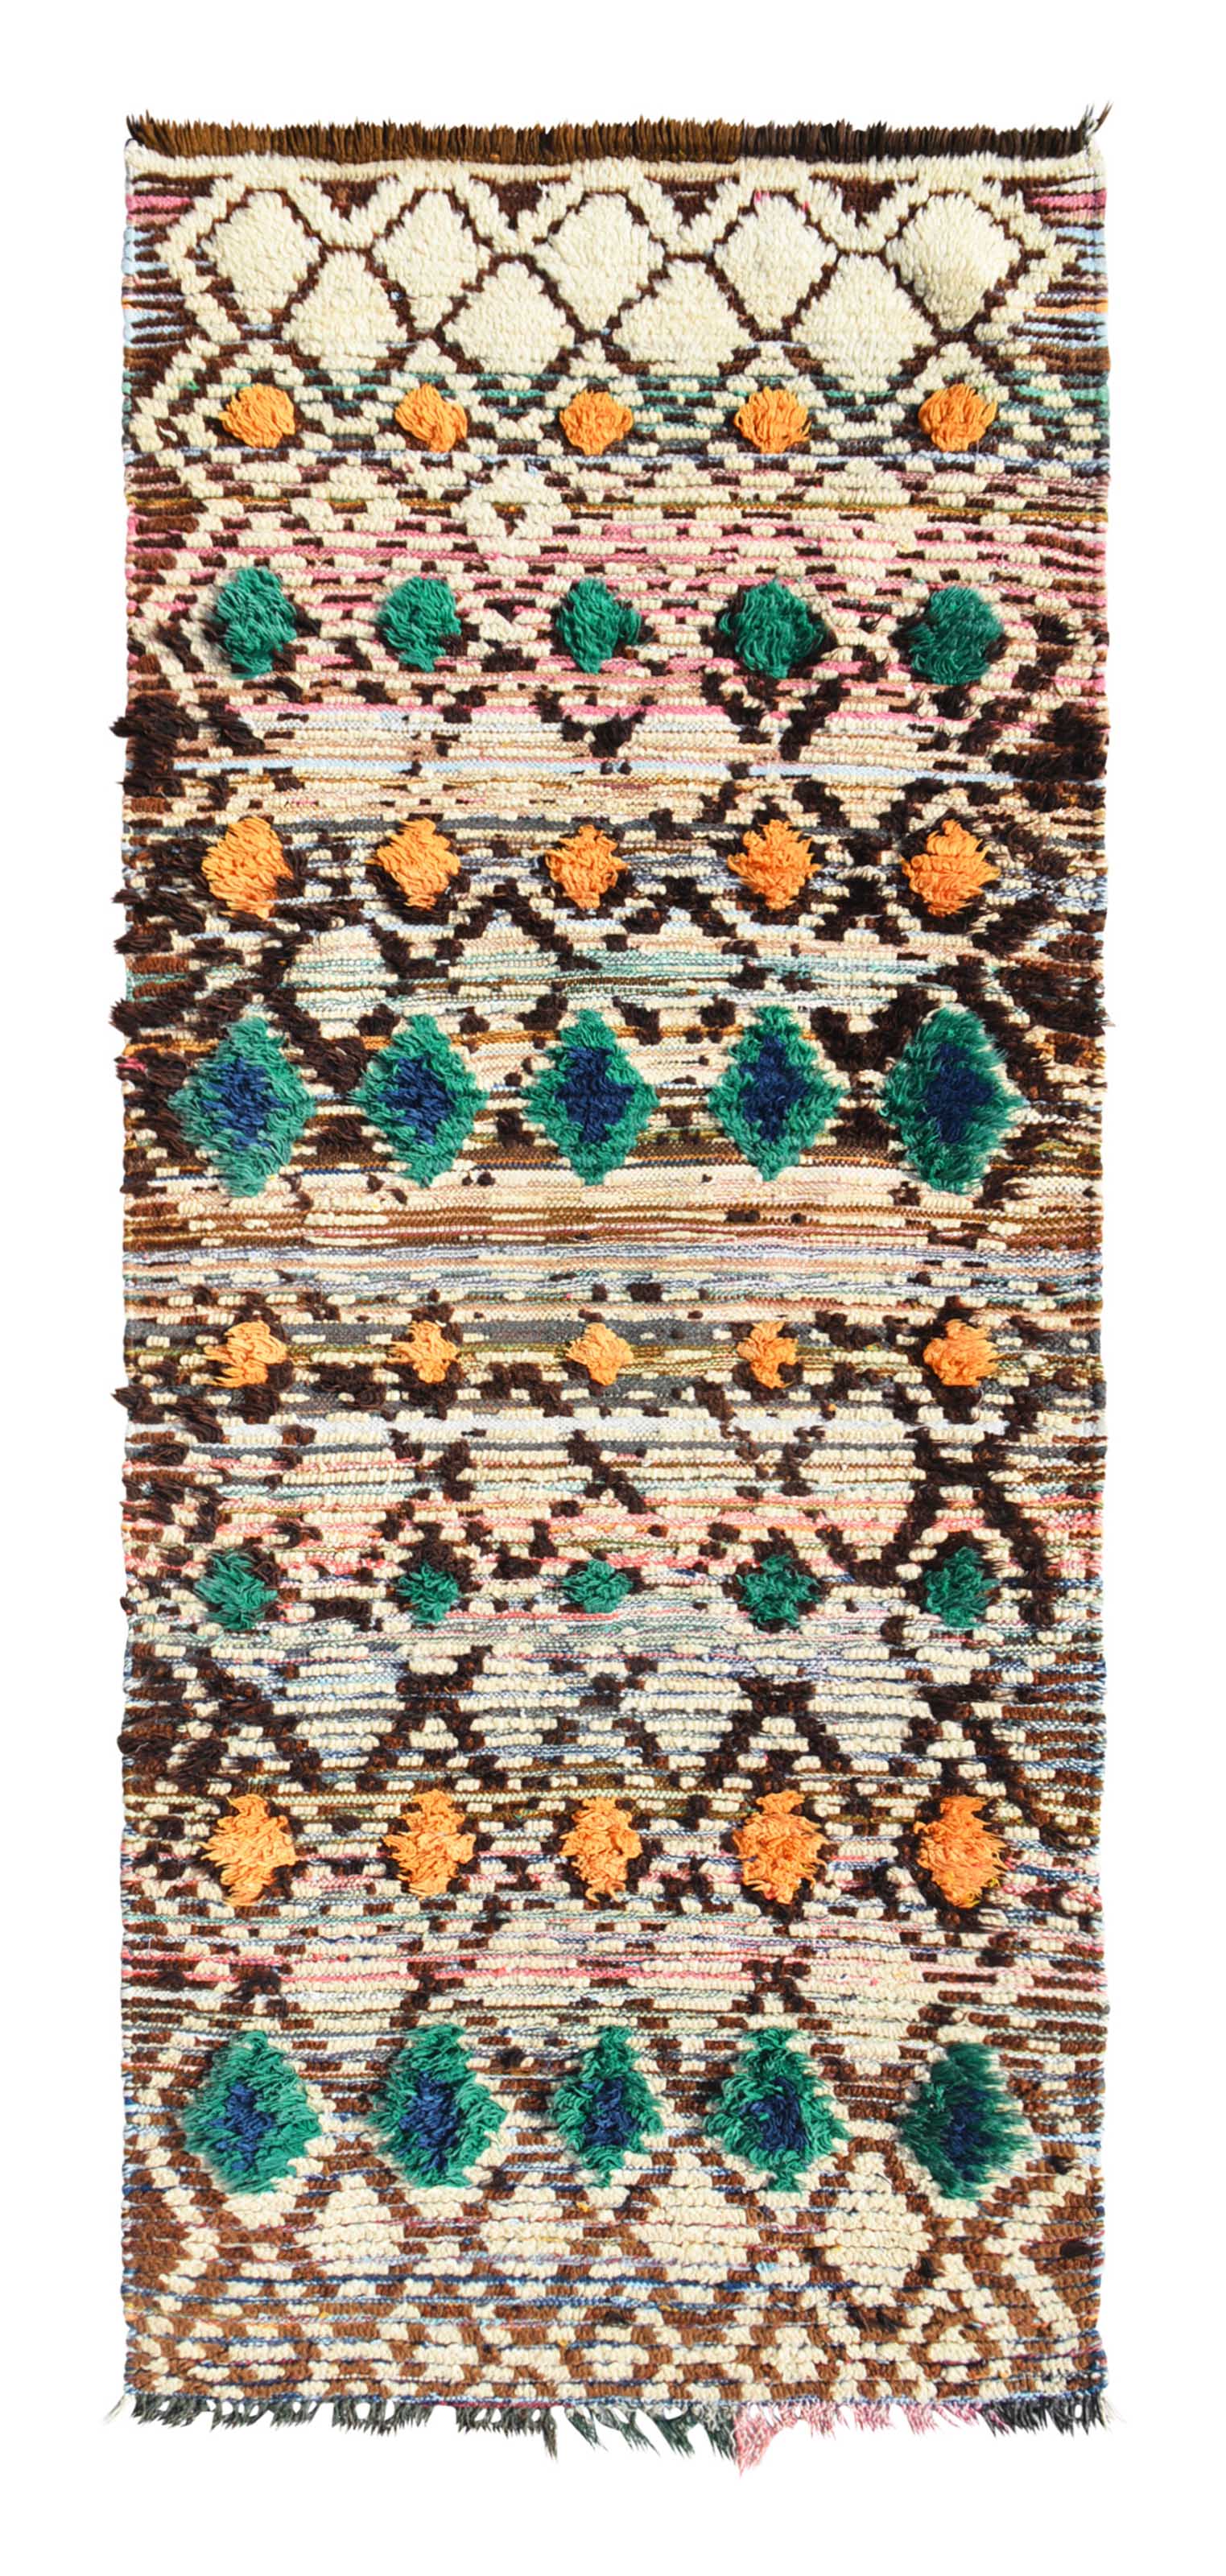 Vintage Moroccan Rug Vintage Hand Knotted Rugs | Vintage Inspired Rugs Illuminate Collective